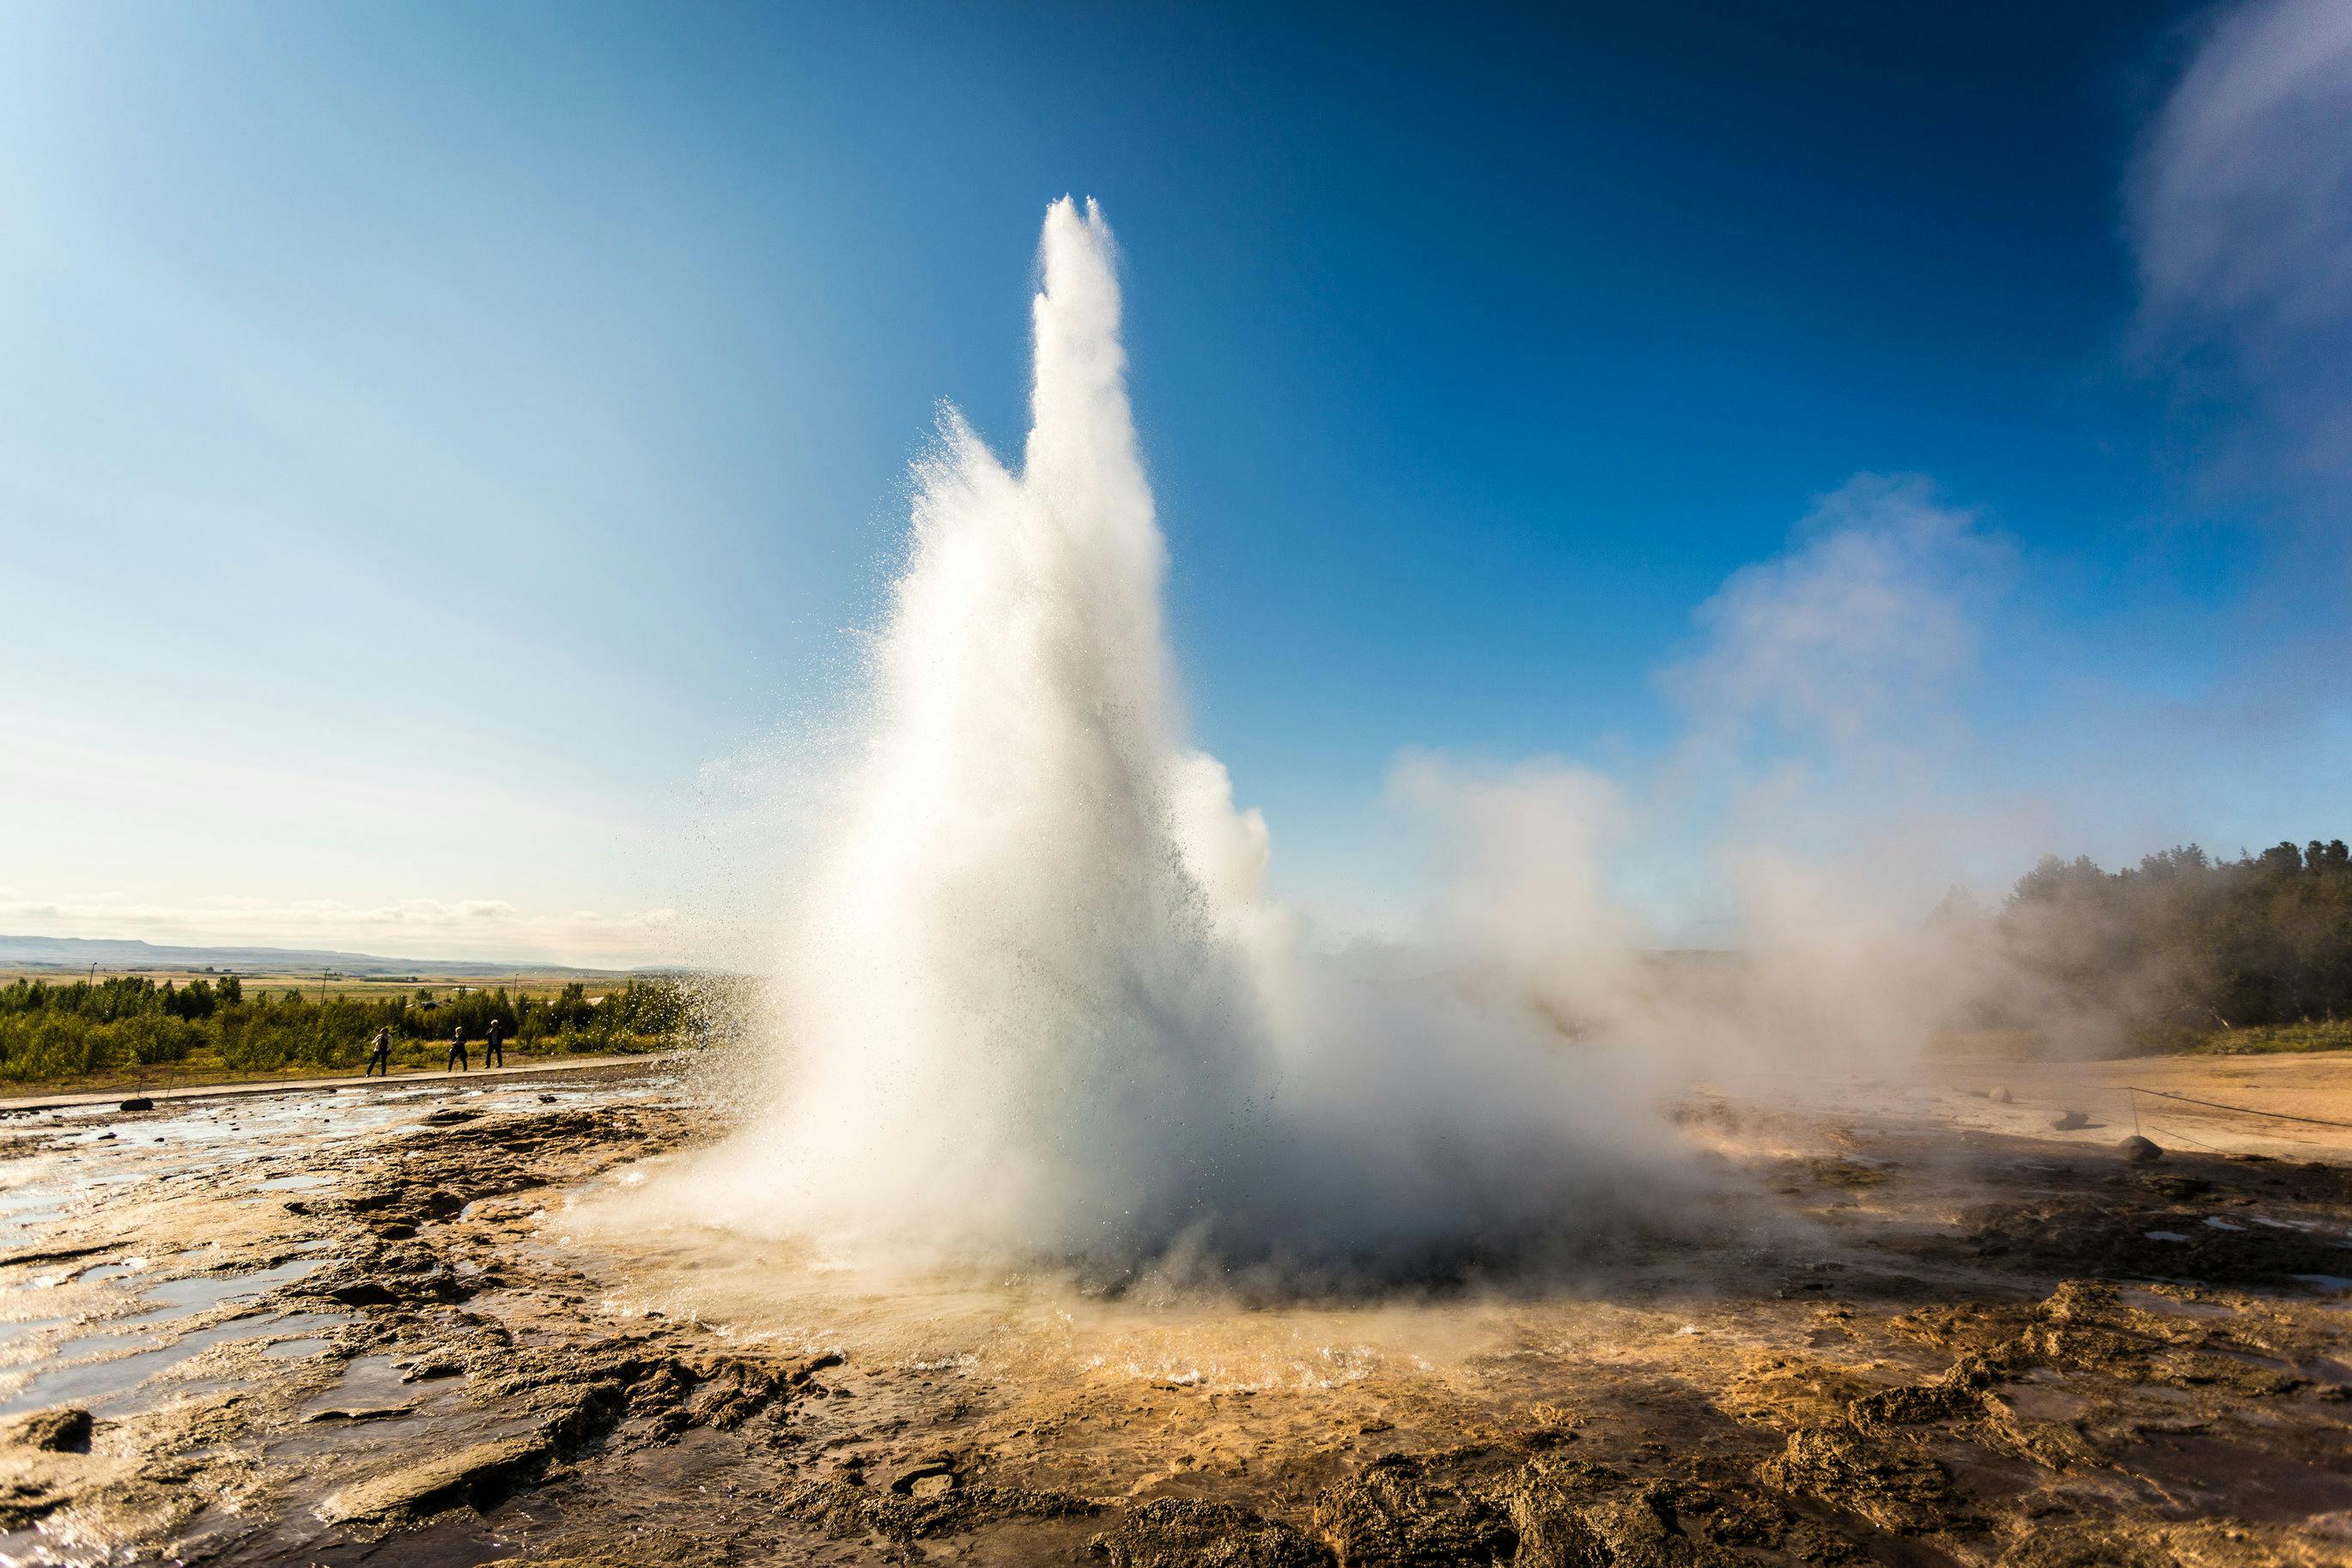 here you see the geyser Strokkur of the Golden Circle erupting boiling water from beneath the Earth.